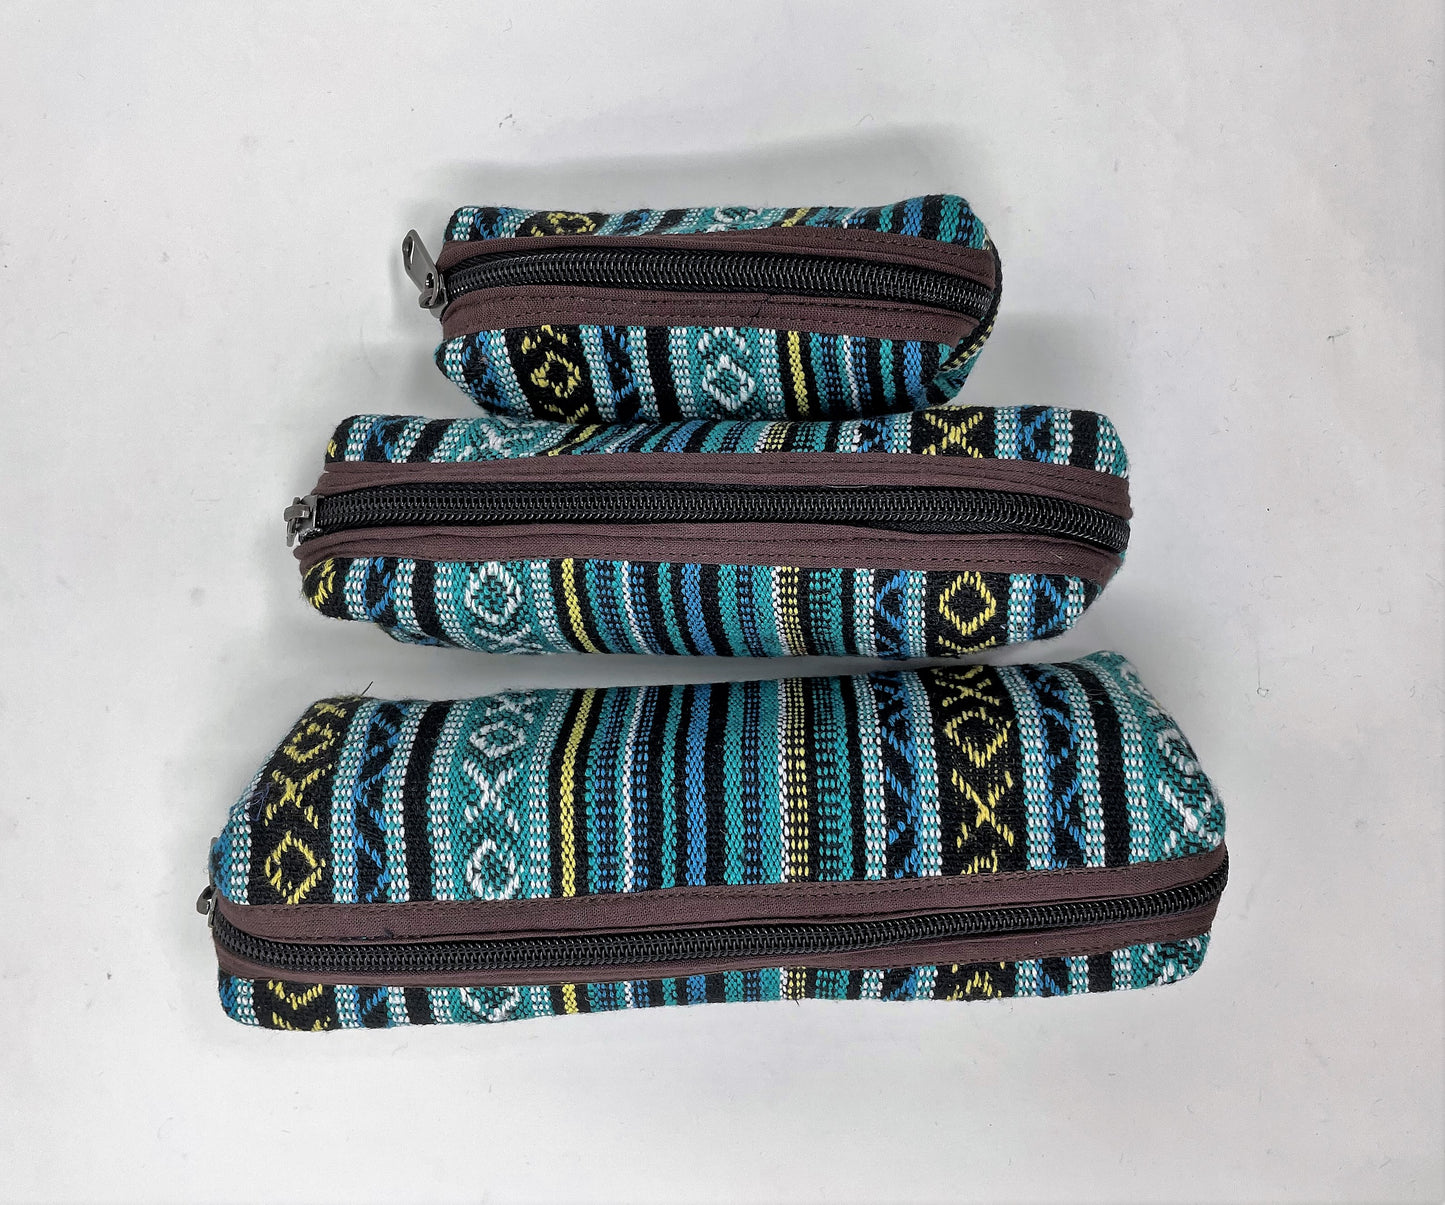 Himalayan Multicolor Hemp Bags 3 Nestle Pouches w/Zippers